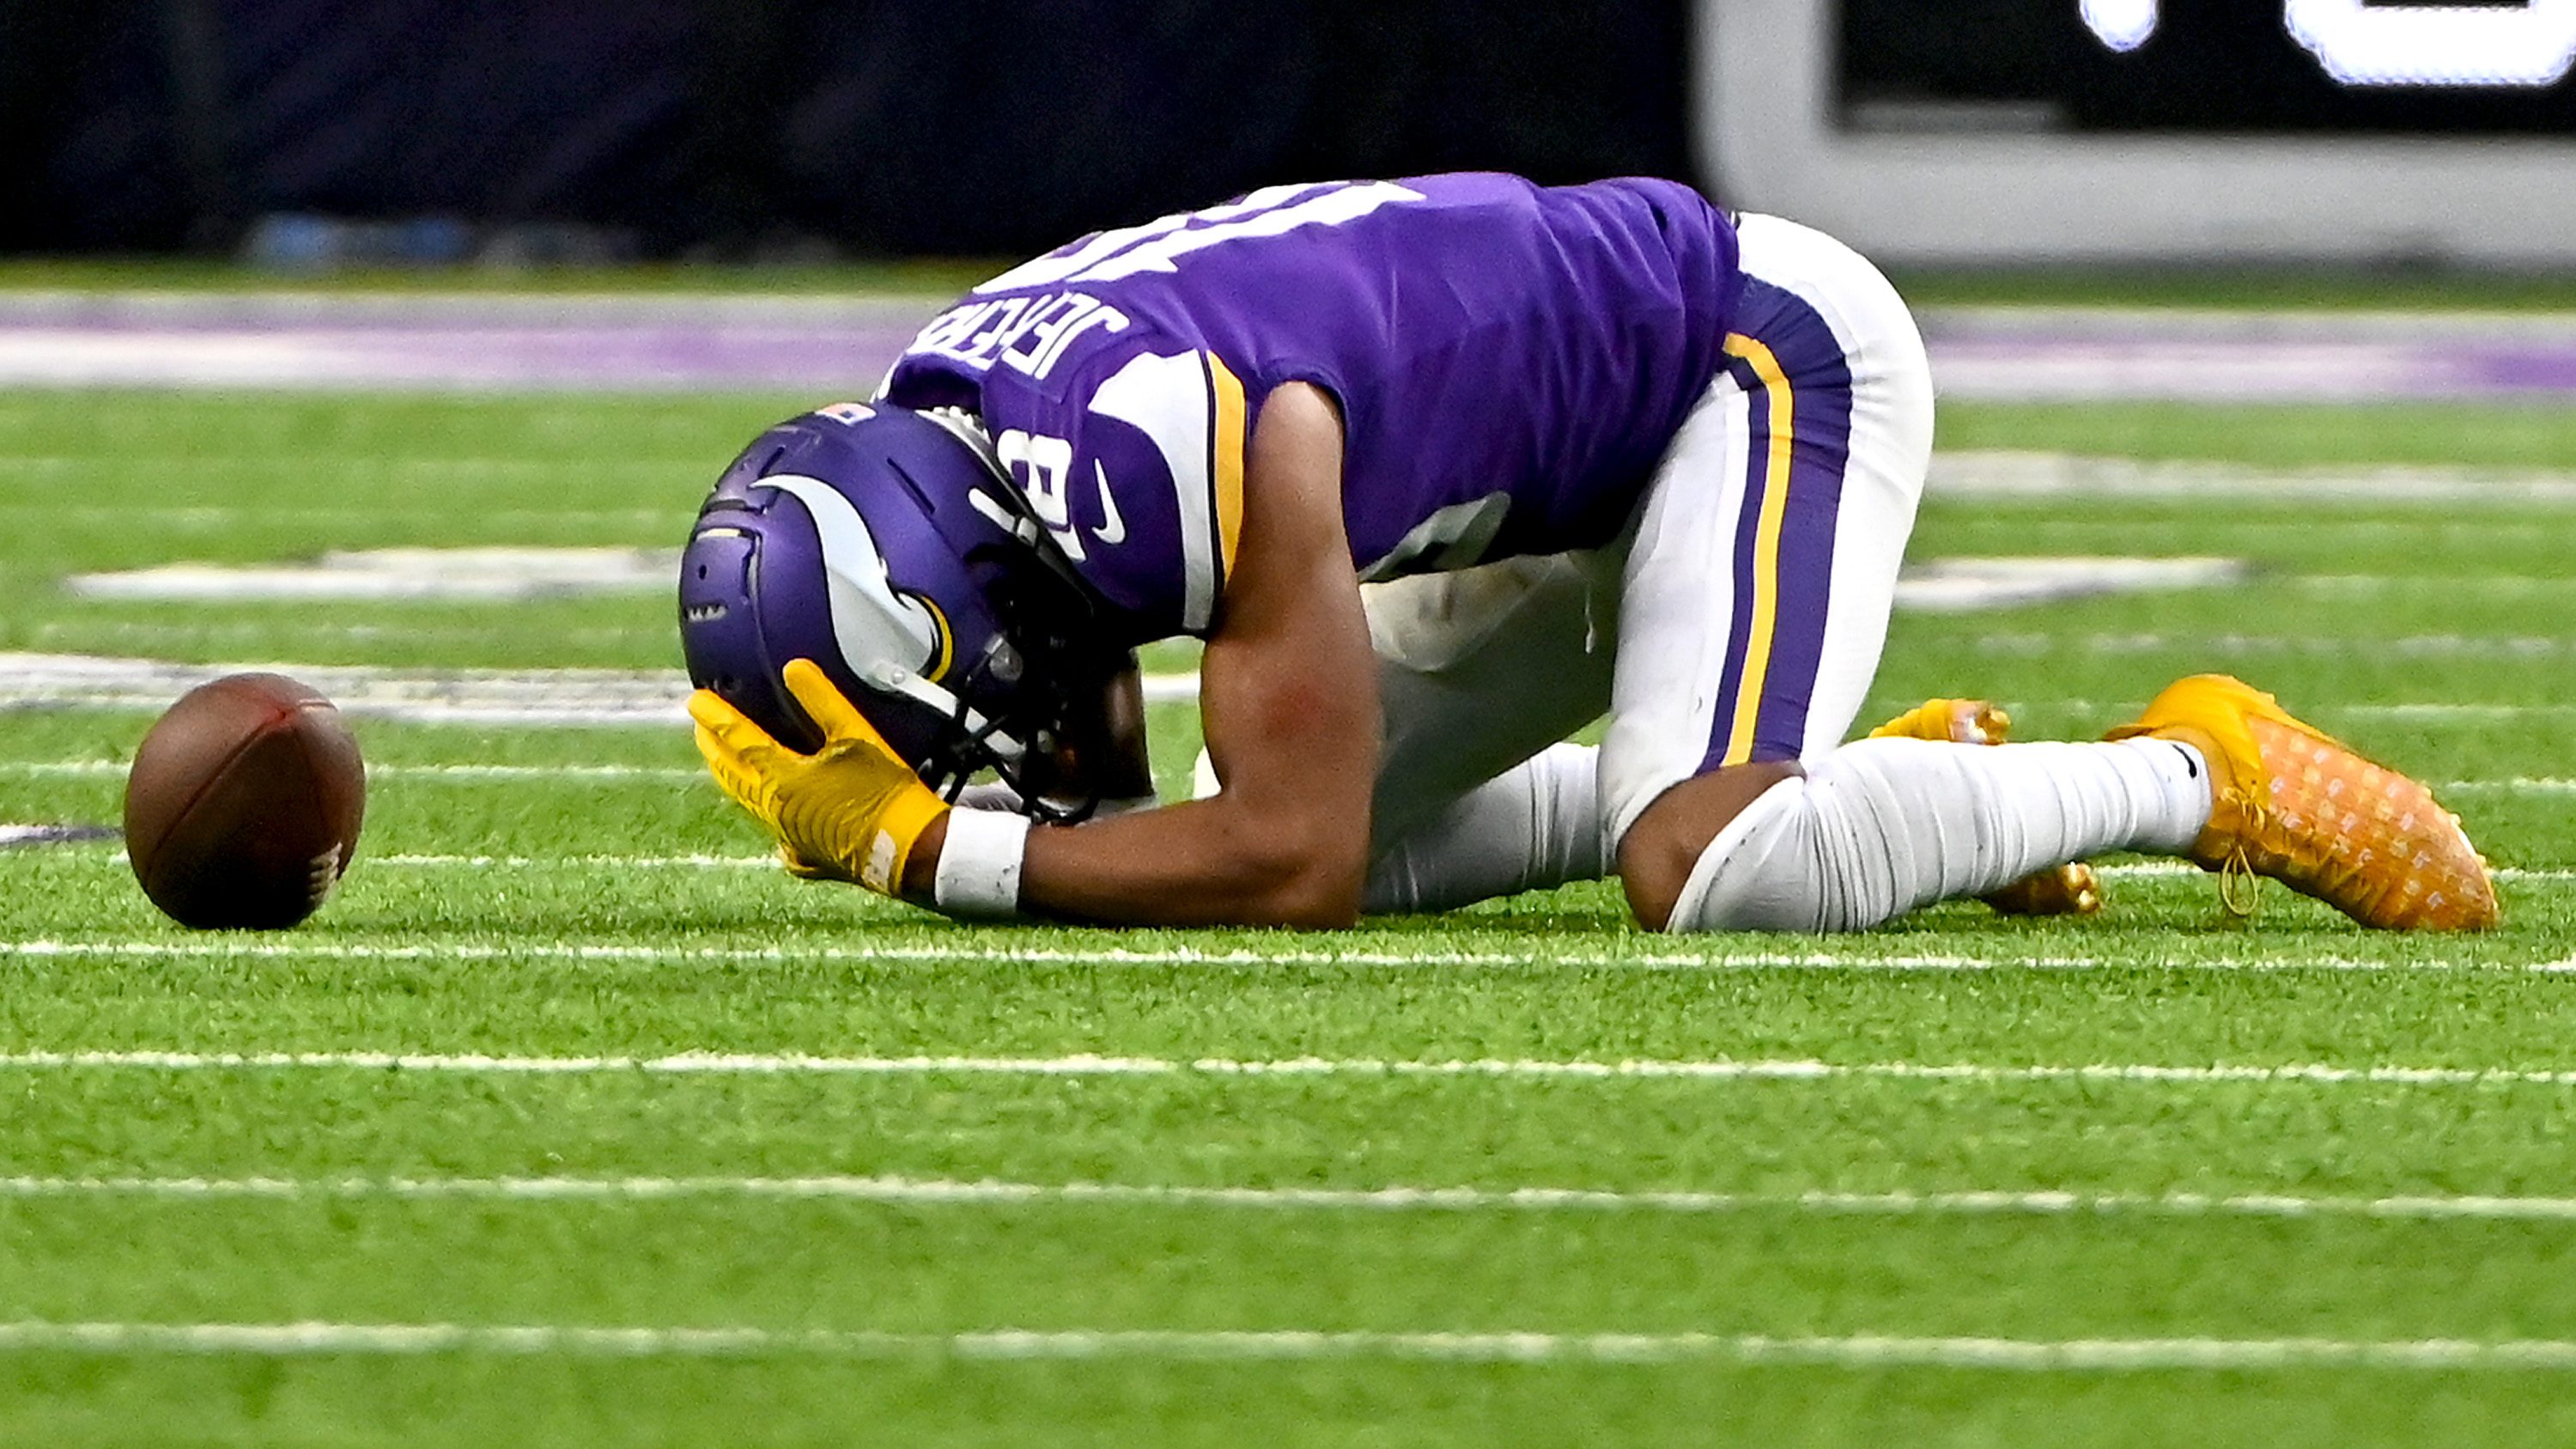 Justin Jefferson could play for the Vikings this week after a chest injury  from a hard hit